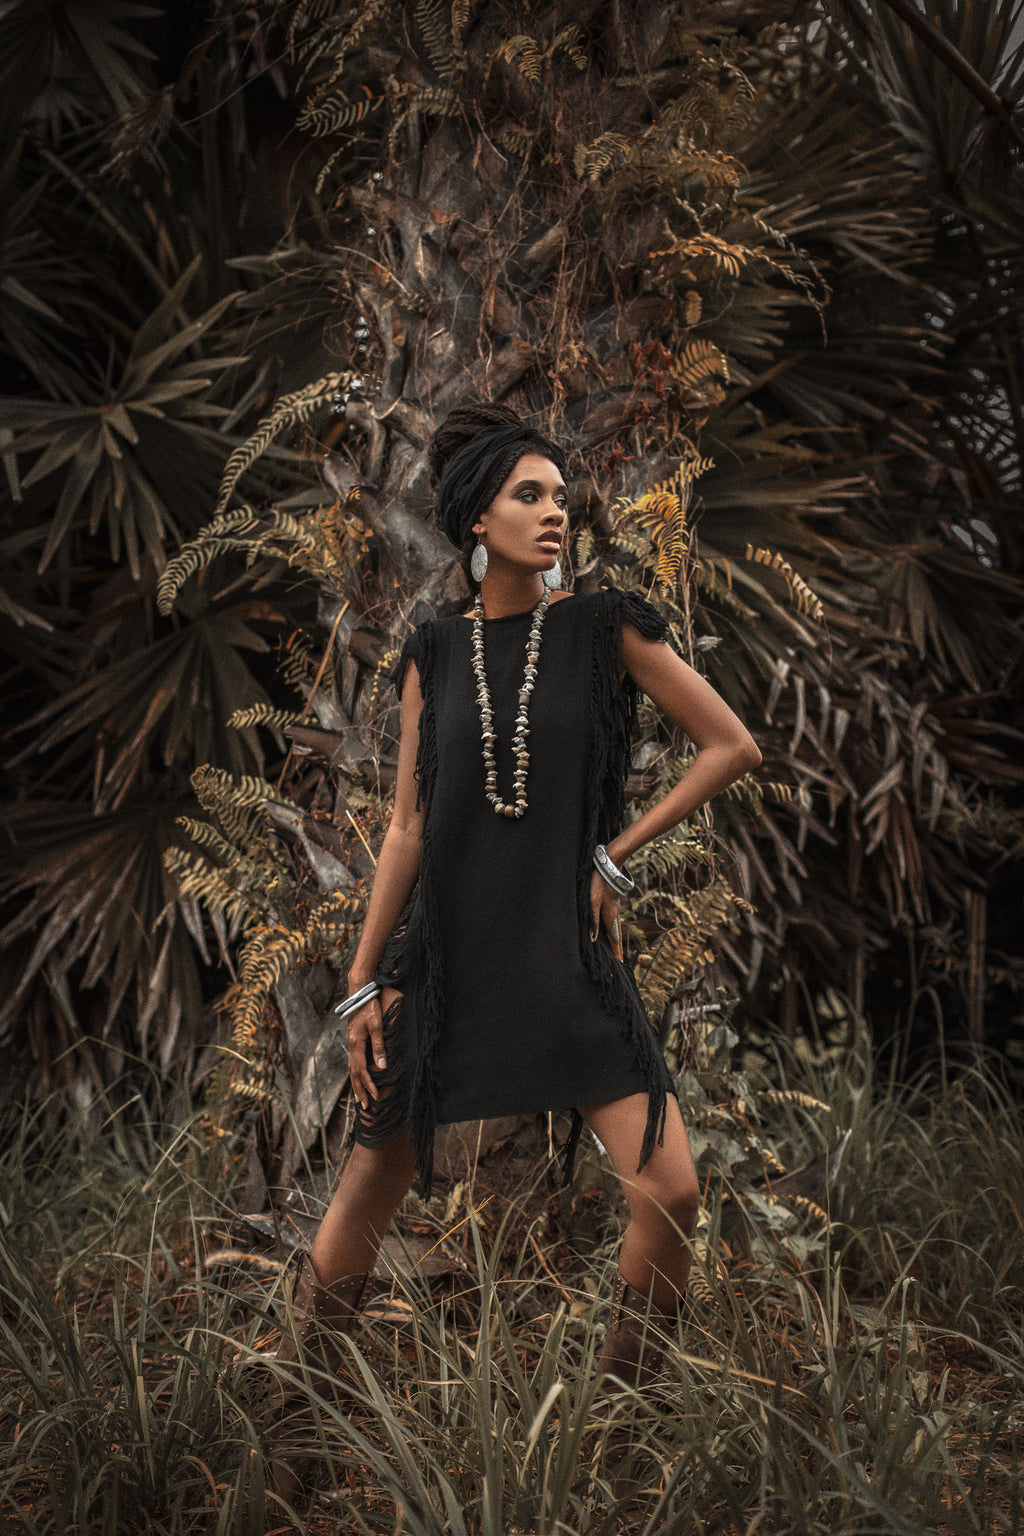 This black mini dress is perfect for a boho-chic look with its open sides and ladders.